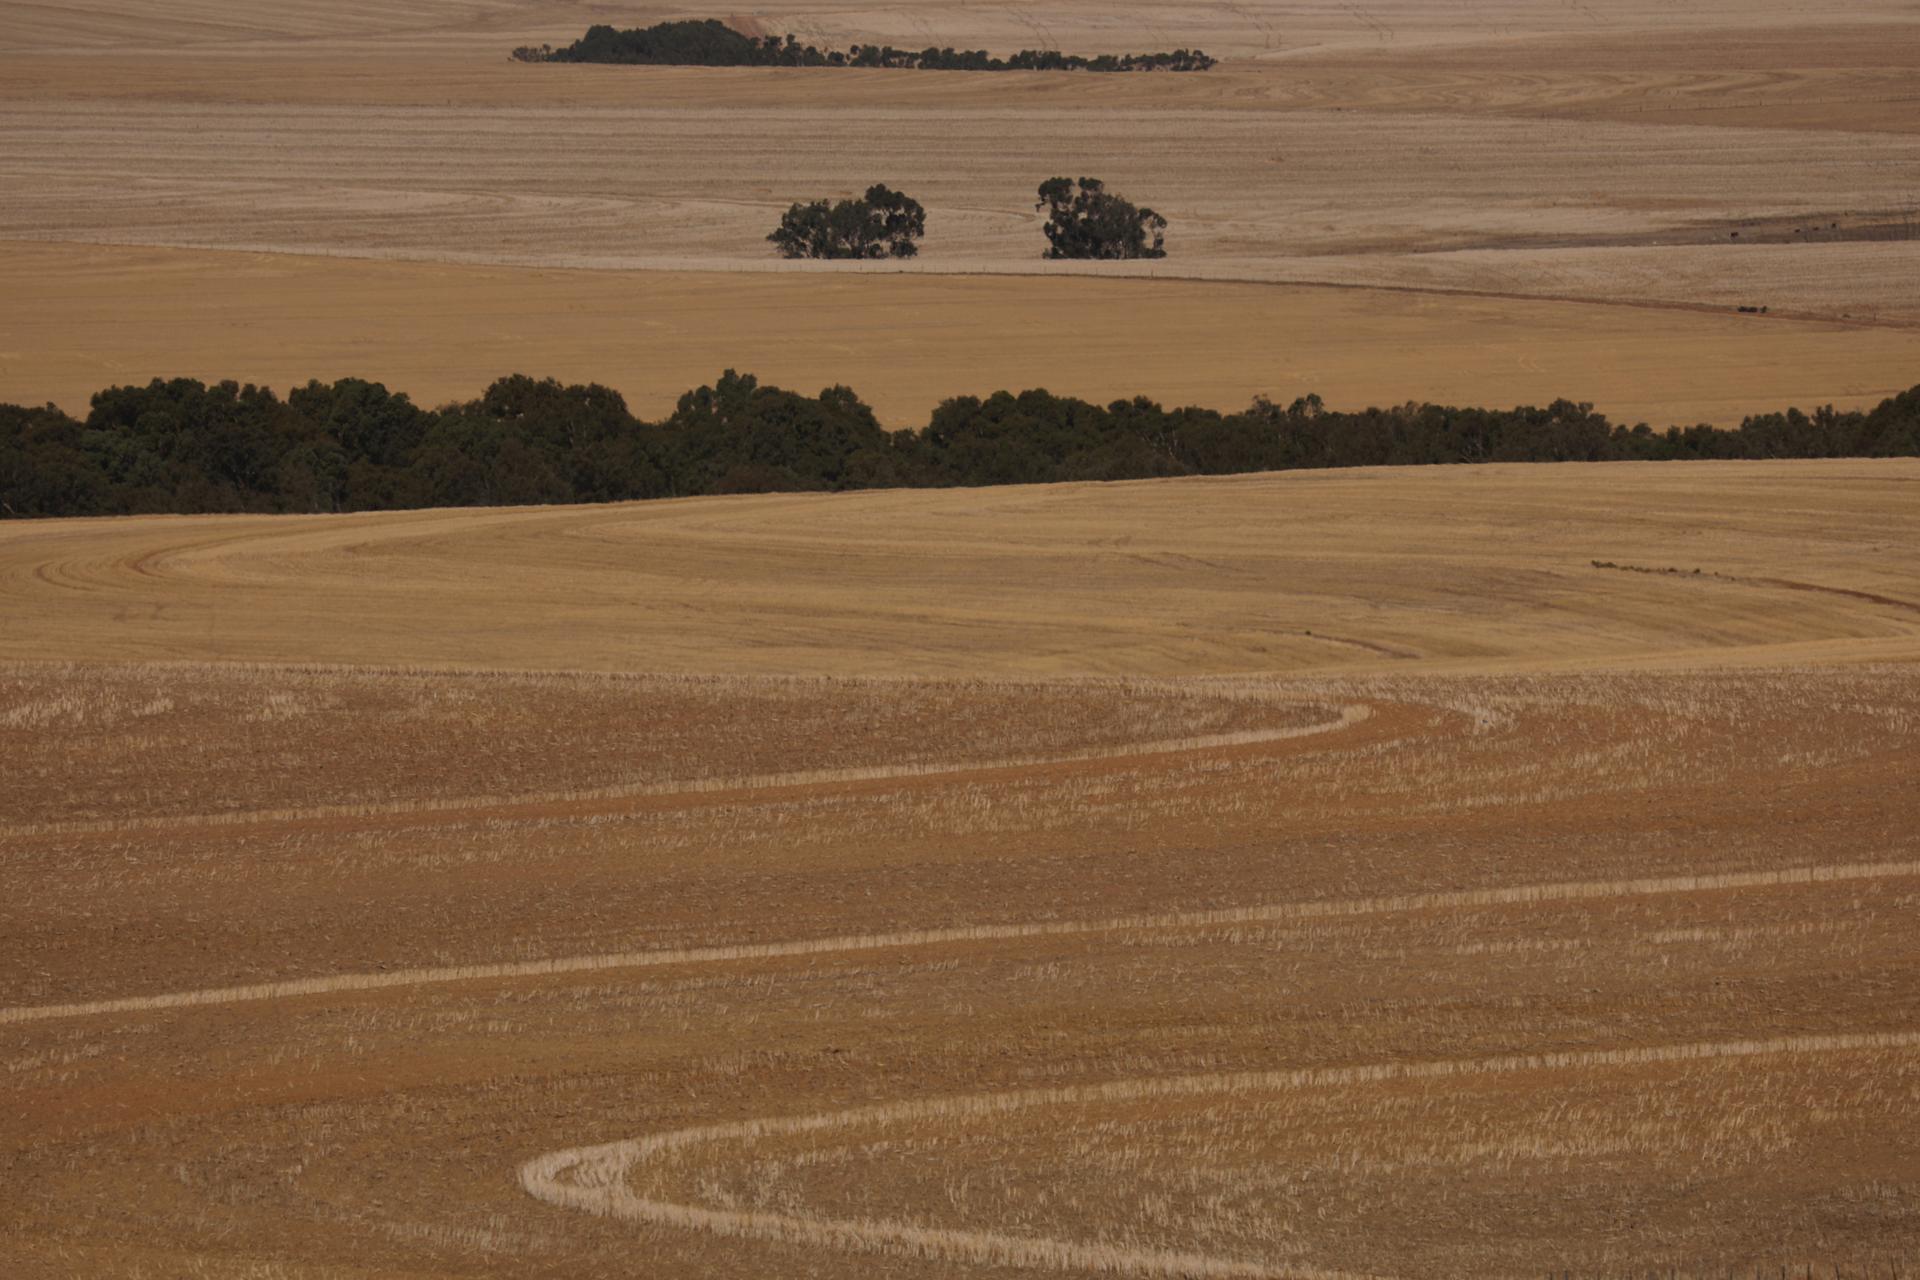 Fields of harvested wheat are seen near Cape Town, South Africa, Feb. 3, 2018. After two years of drought, concerns are growing around agriculture as the city faces 